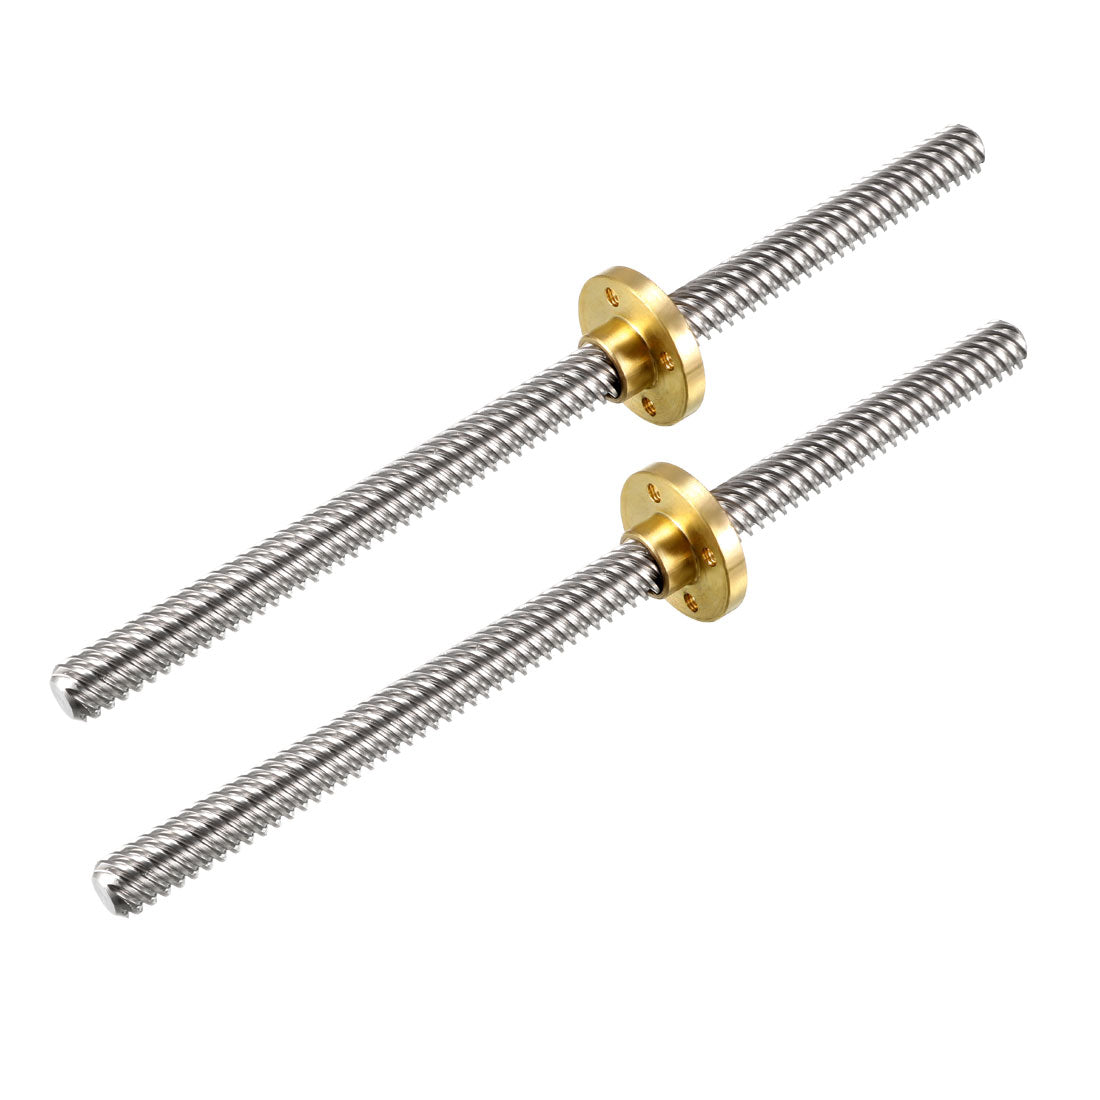 uxcell Uxcell 2PCS 150mm T8 Pitch 2mm Lead 14mm Lead Screw Rod with Copper Nut for 3D Printer